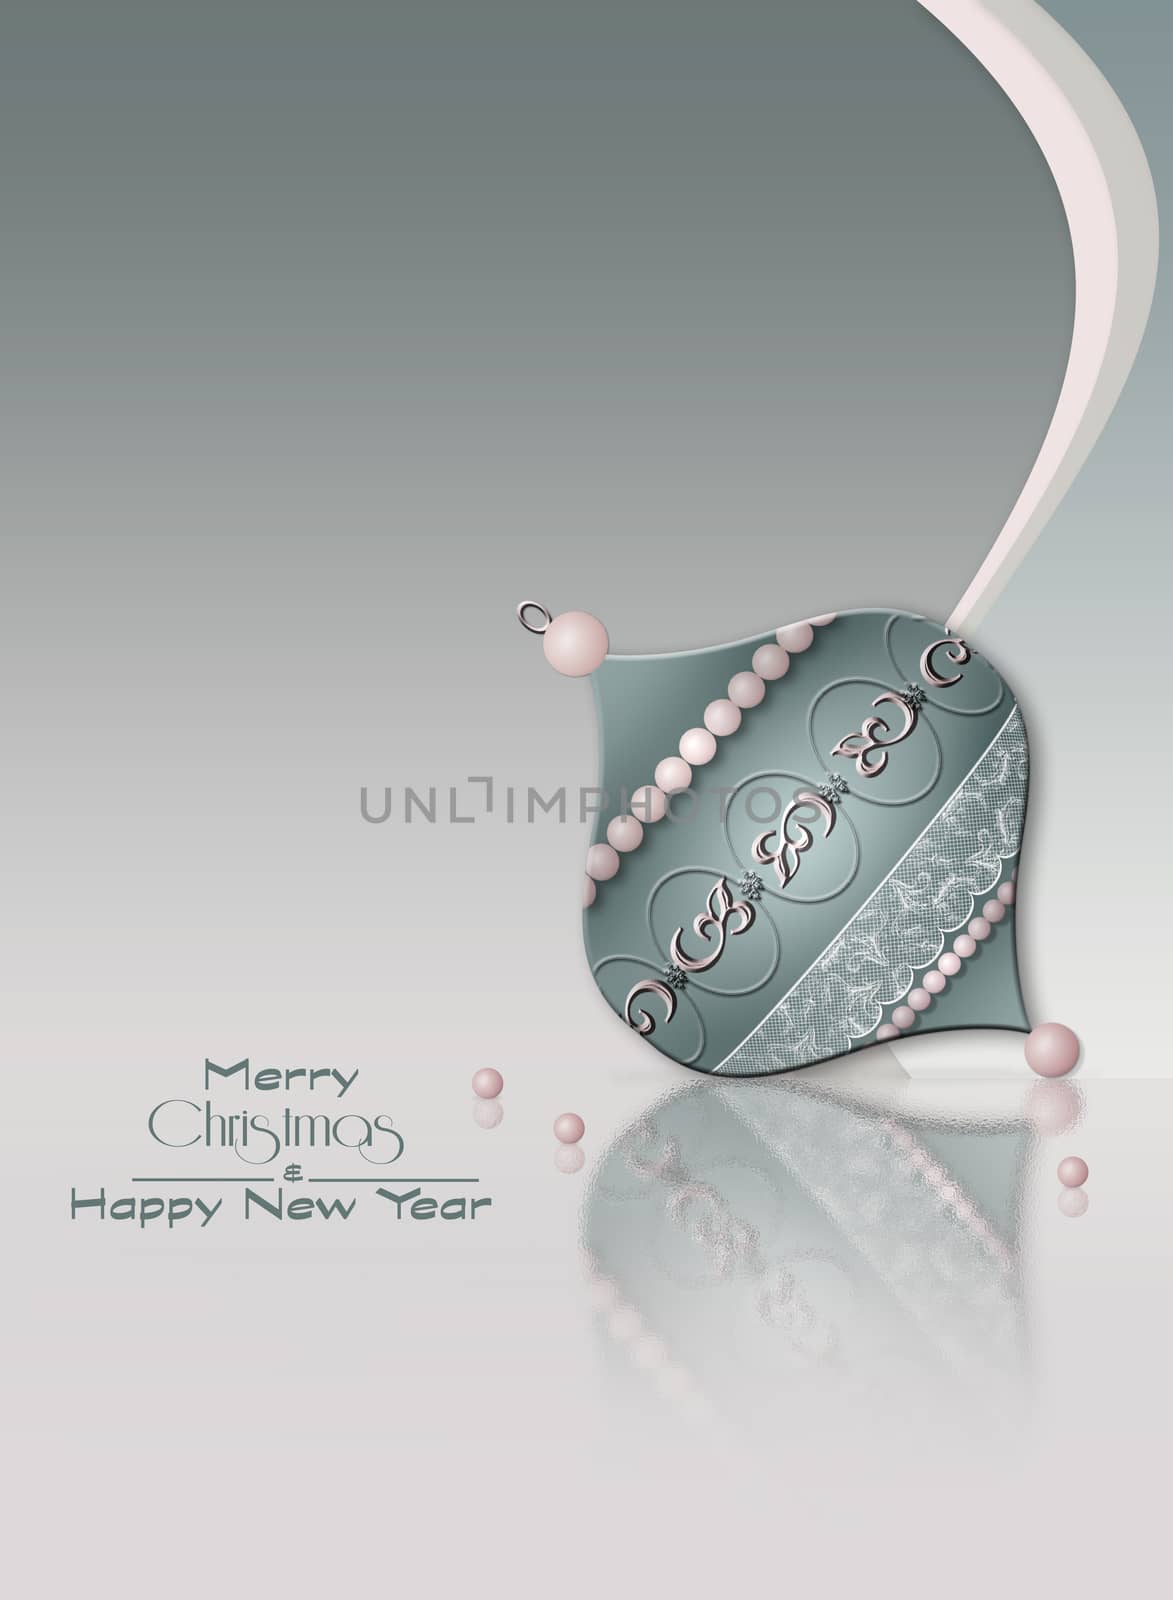 Luxury Christmas New Year background with bauble decorated with jewelry pink pearls on reflection on pastel grey background. Text Merry Christmas Happy New Year. Copy space, mock up. 3D illustration